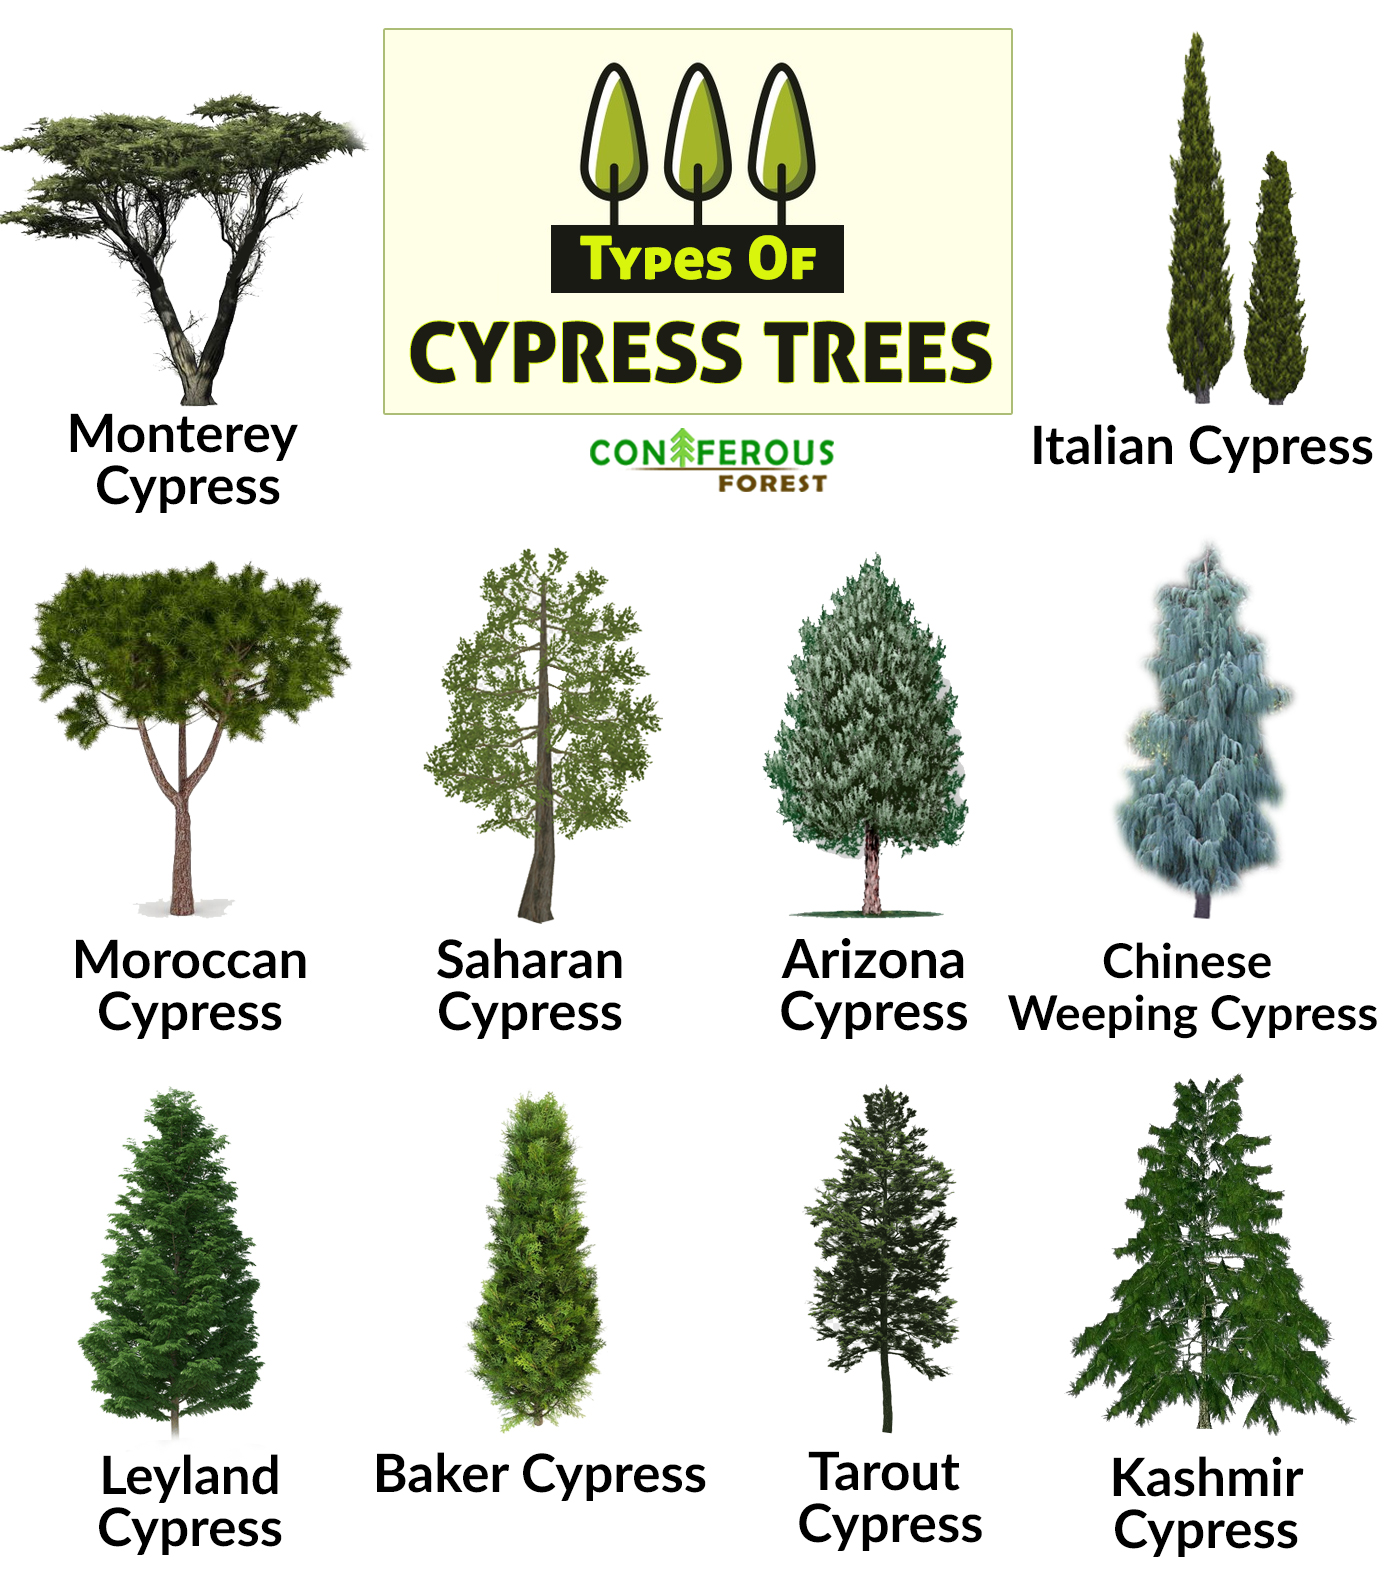 Cypress Tree Facts, Types, Identification, Diseases, Pictures